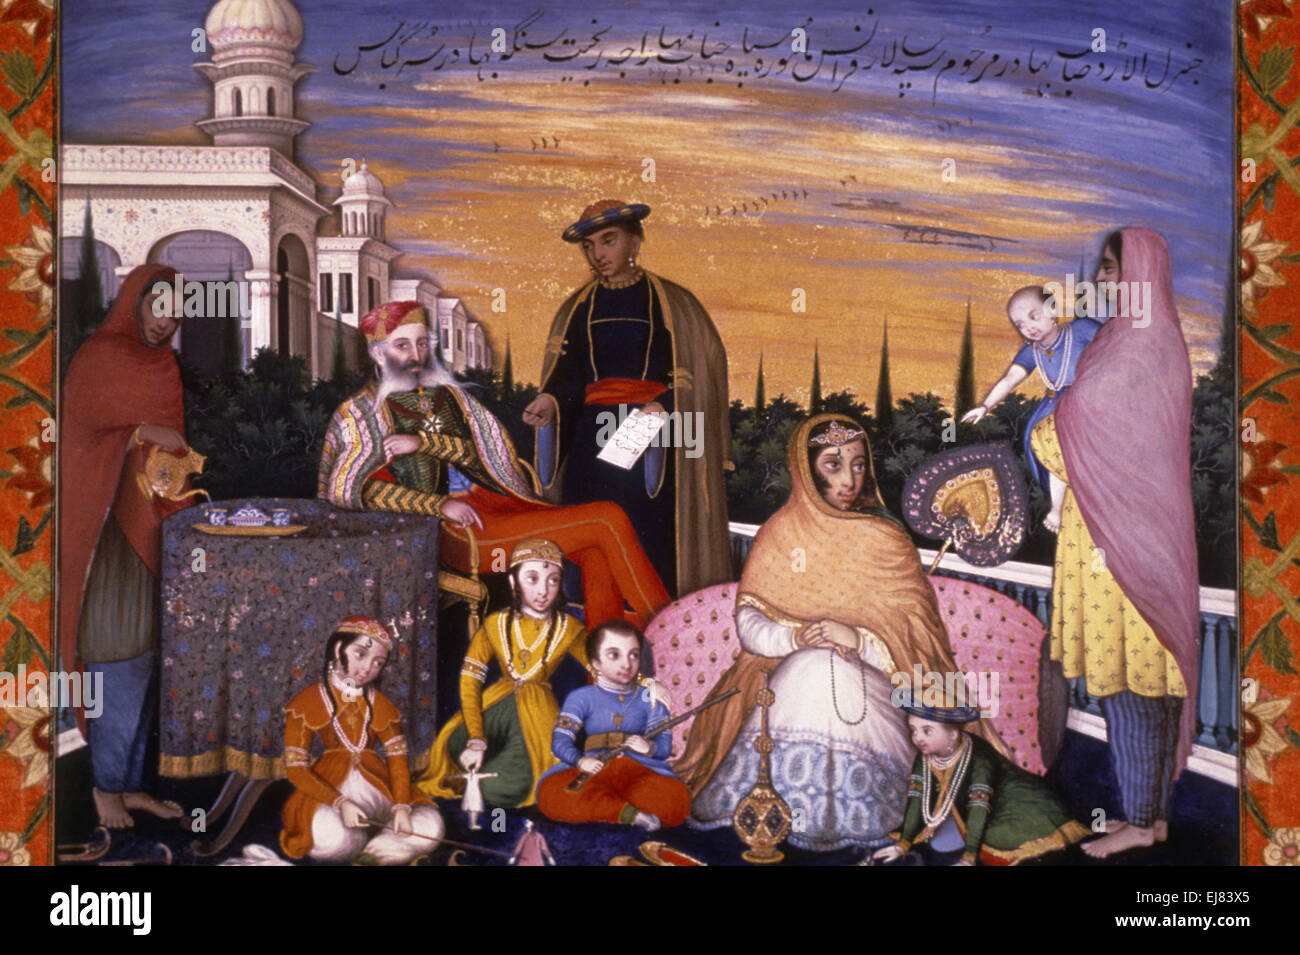 General Jean Francois Allard and his family. Mughal miniature painting circa 1838 A.D. India Stock Photo